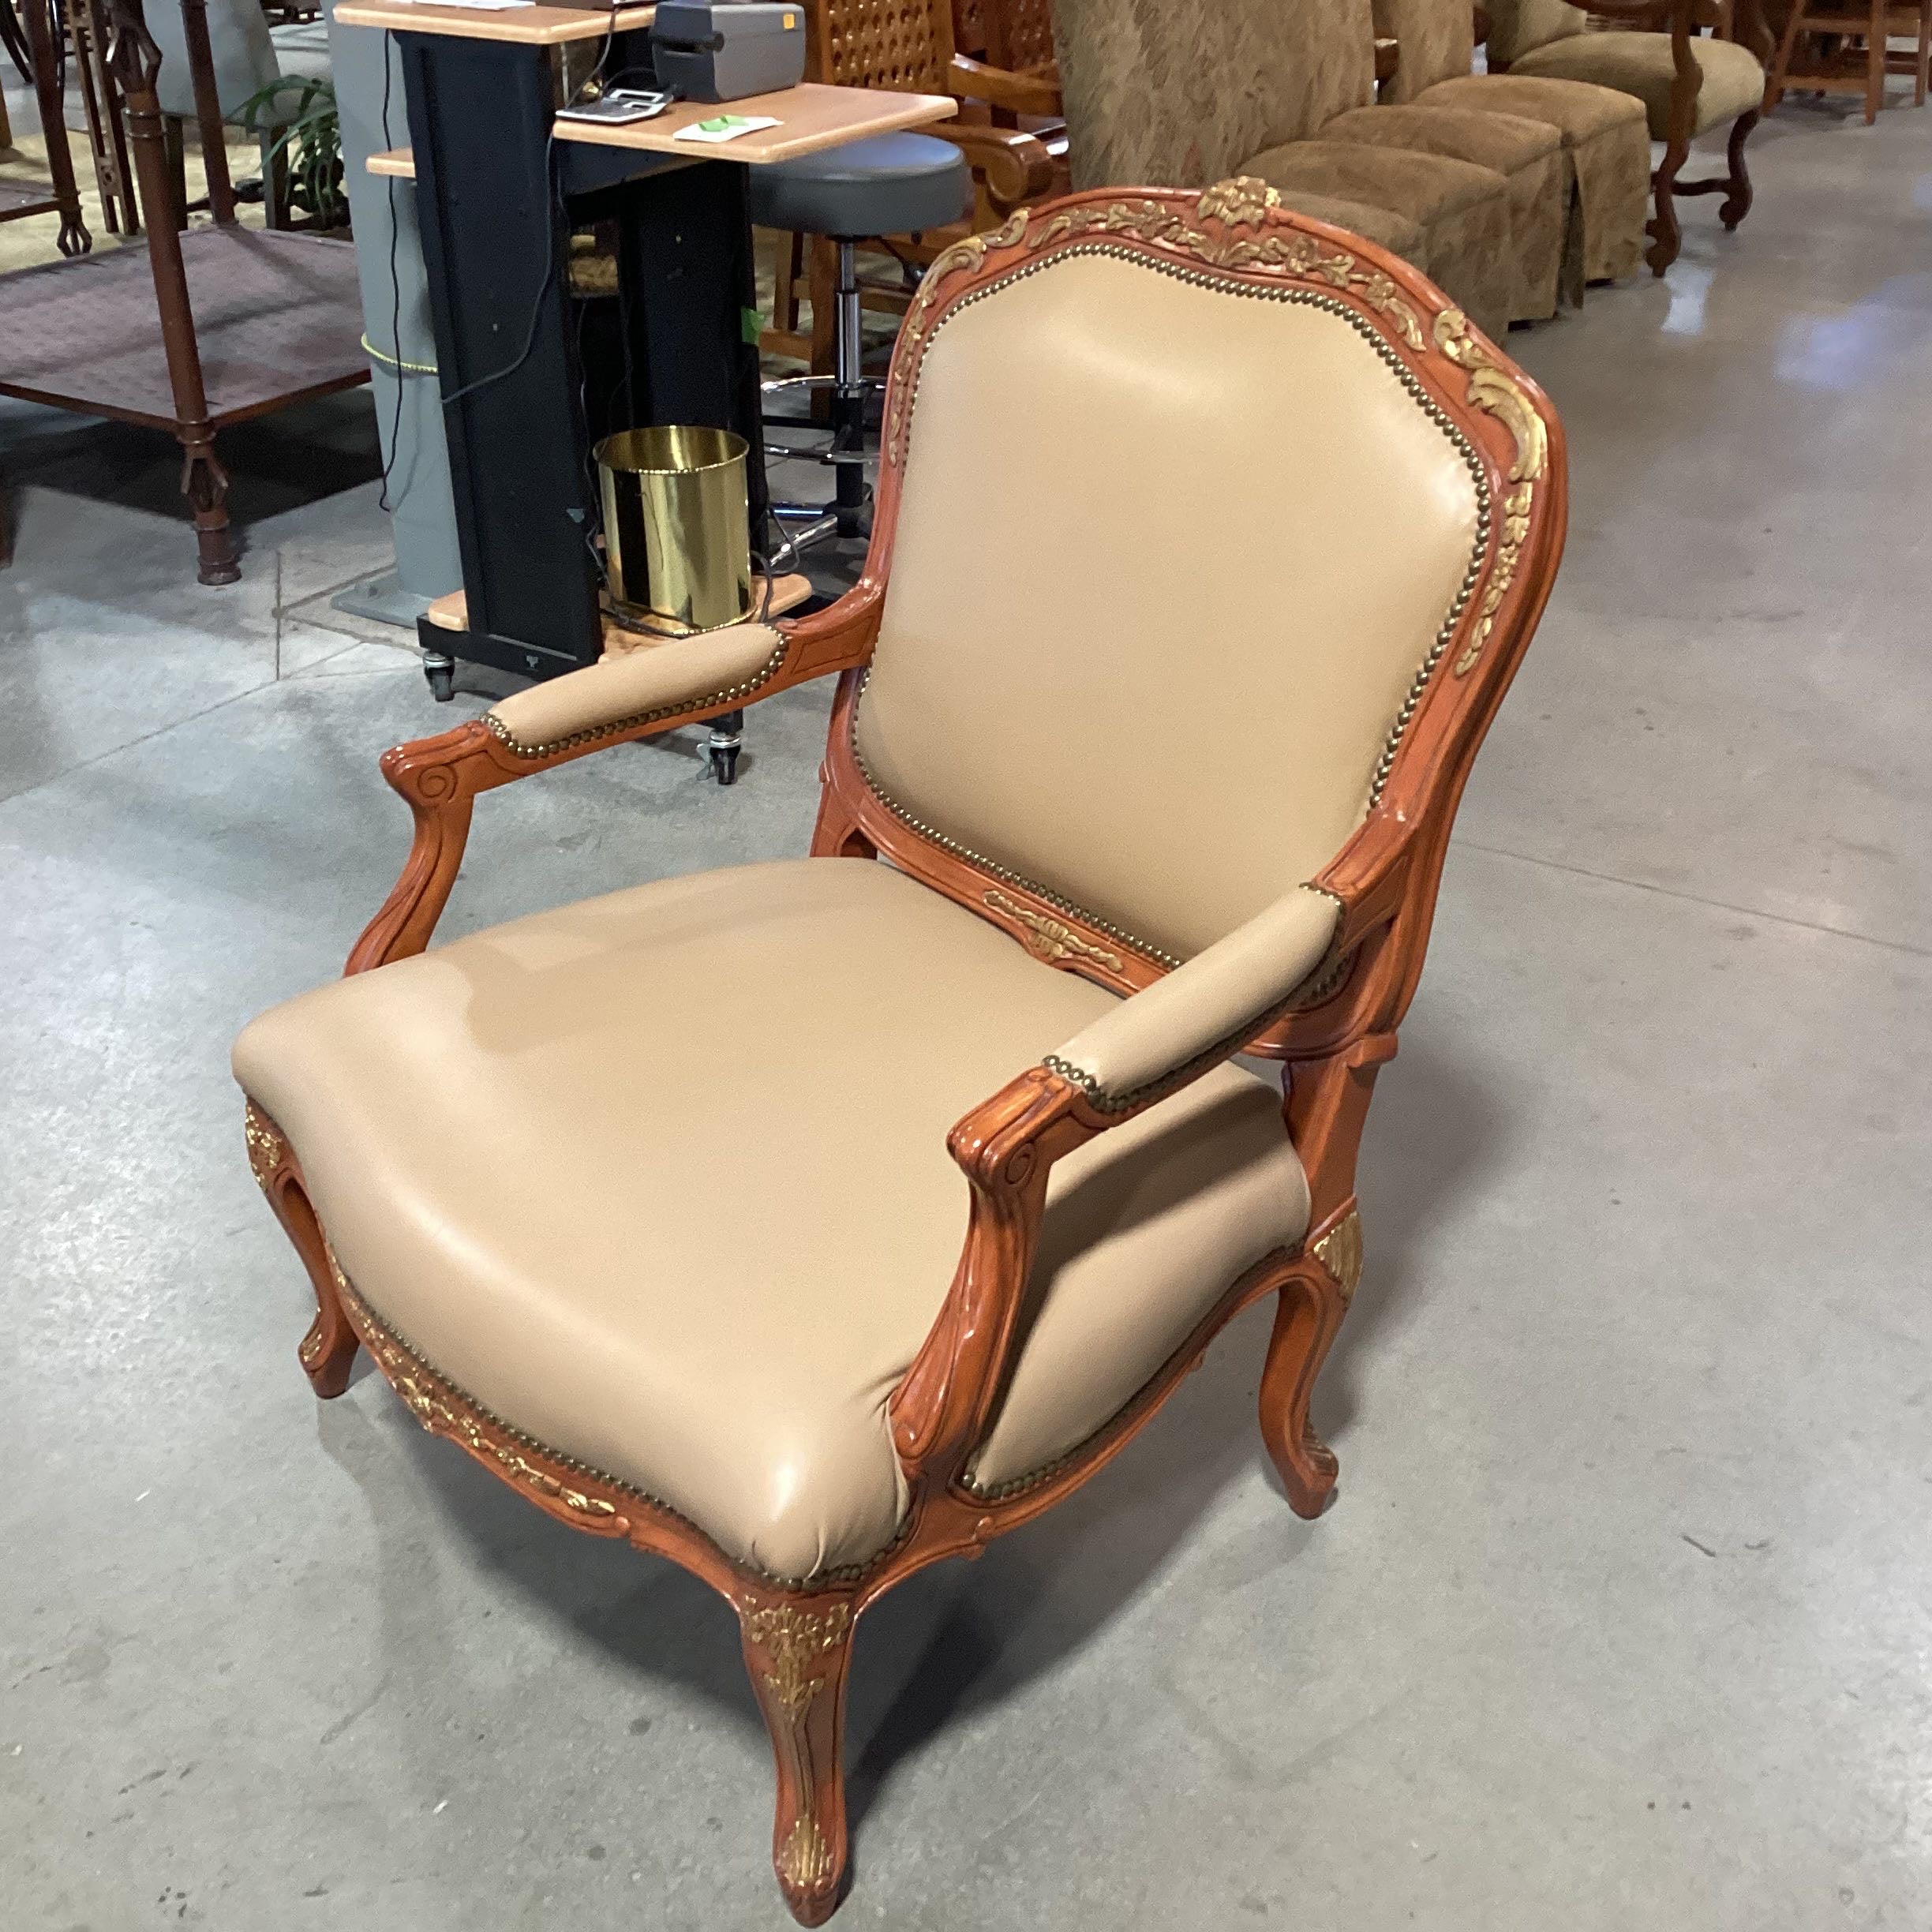 Beverly Interiors Stewart Furniture Carved Wood Gilded Detail Beige Leather Nailhead Chair